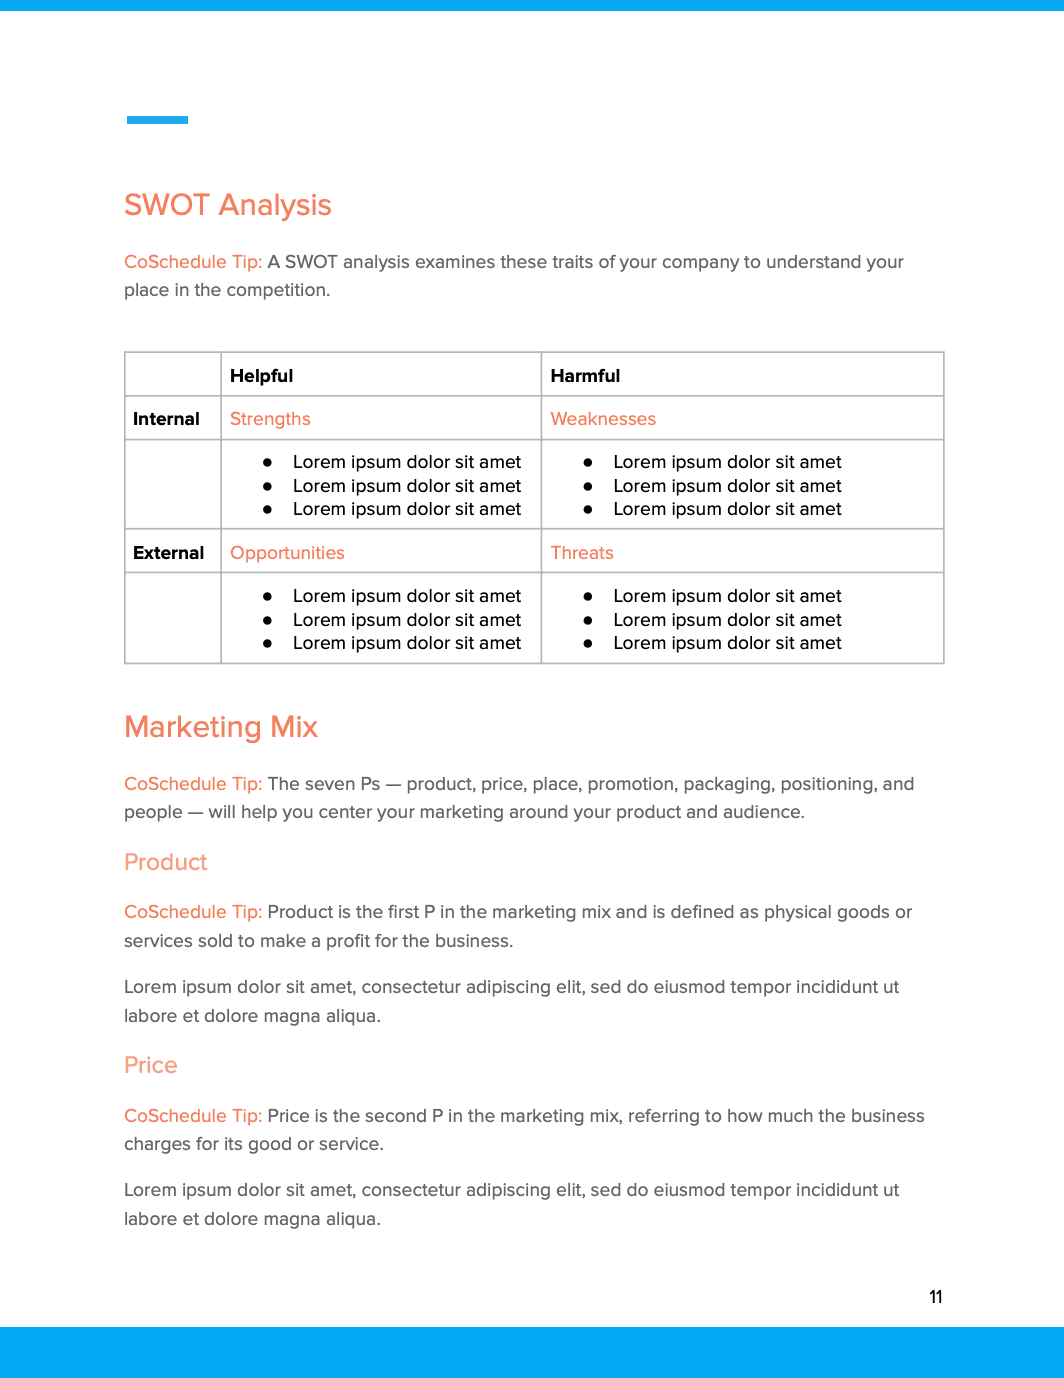 Outline of a SWOT analysis from CoSchedule